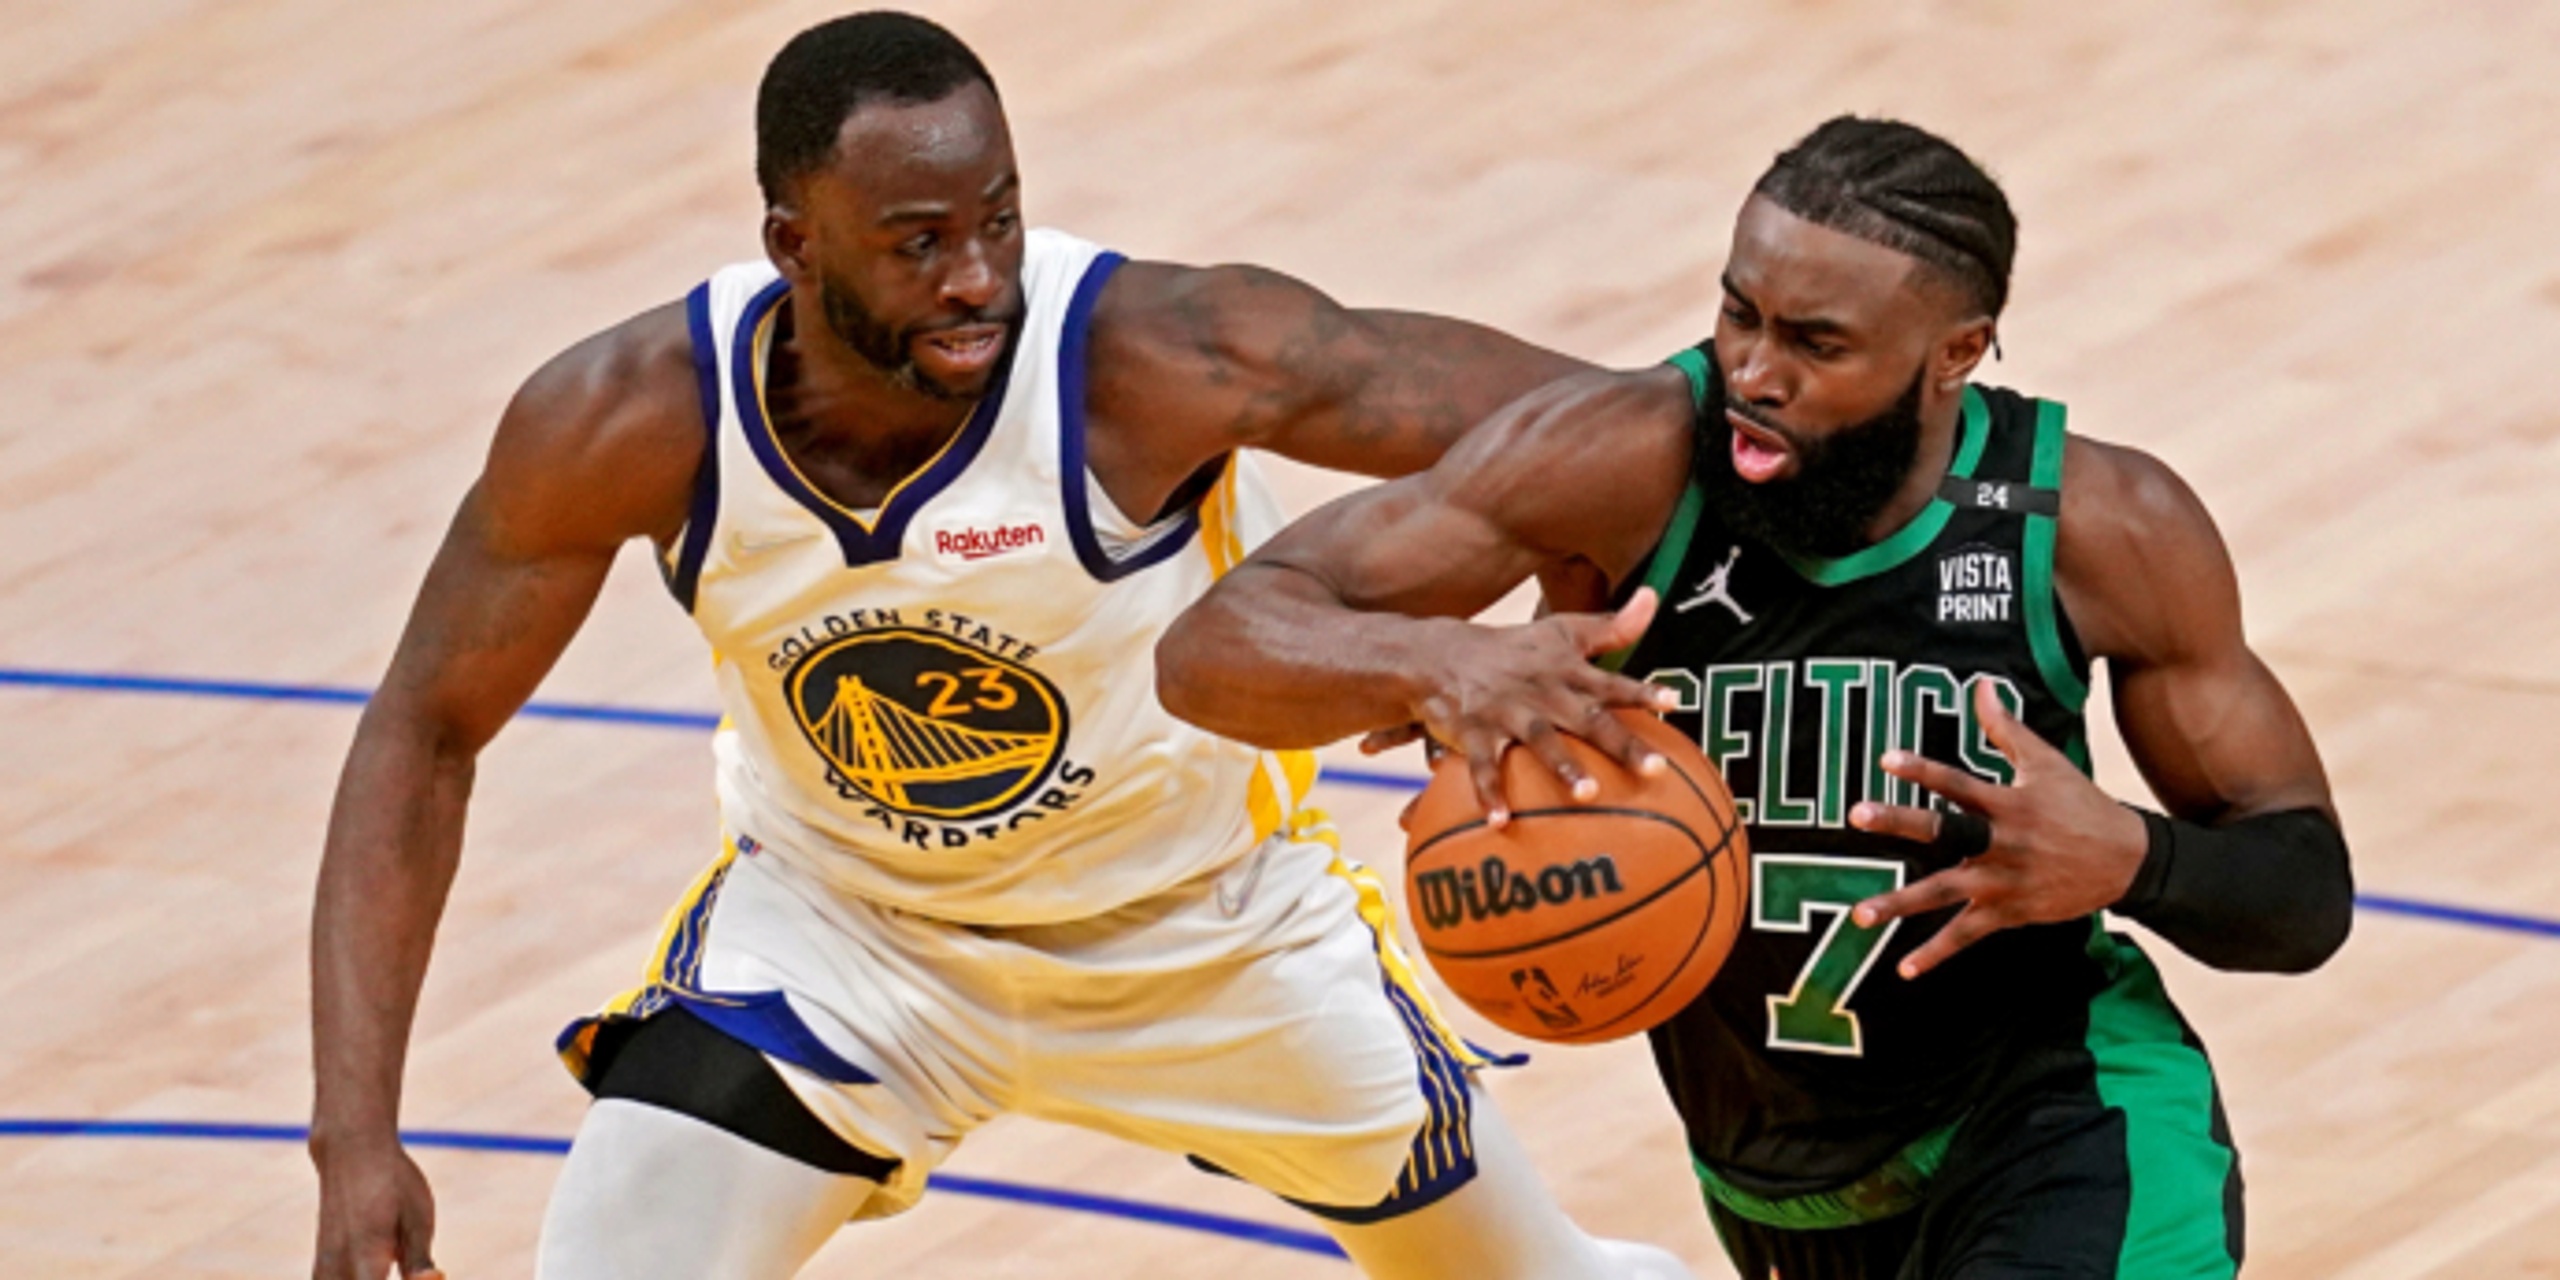 Draymond Green's return to form couldn't come at a better time